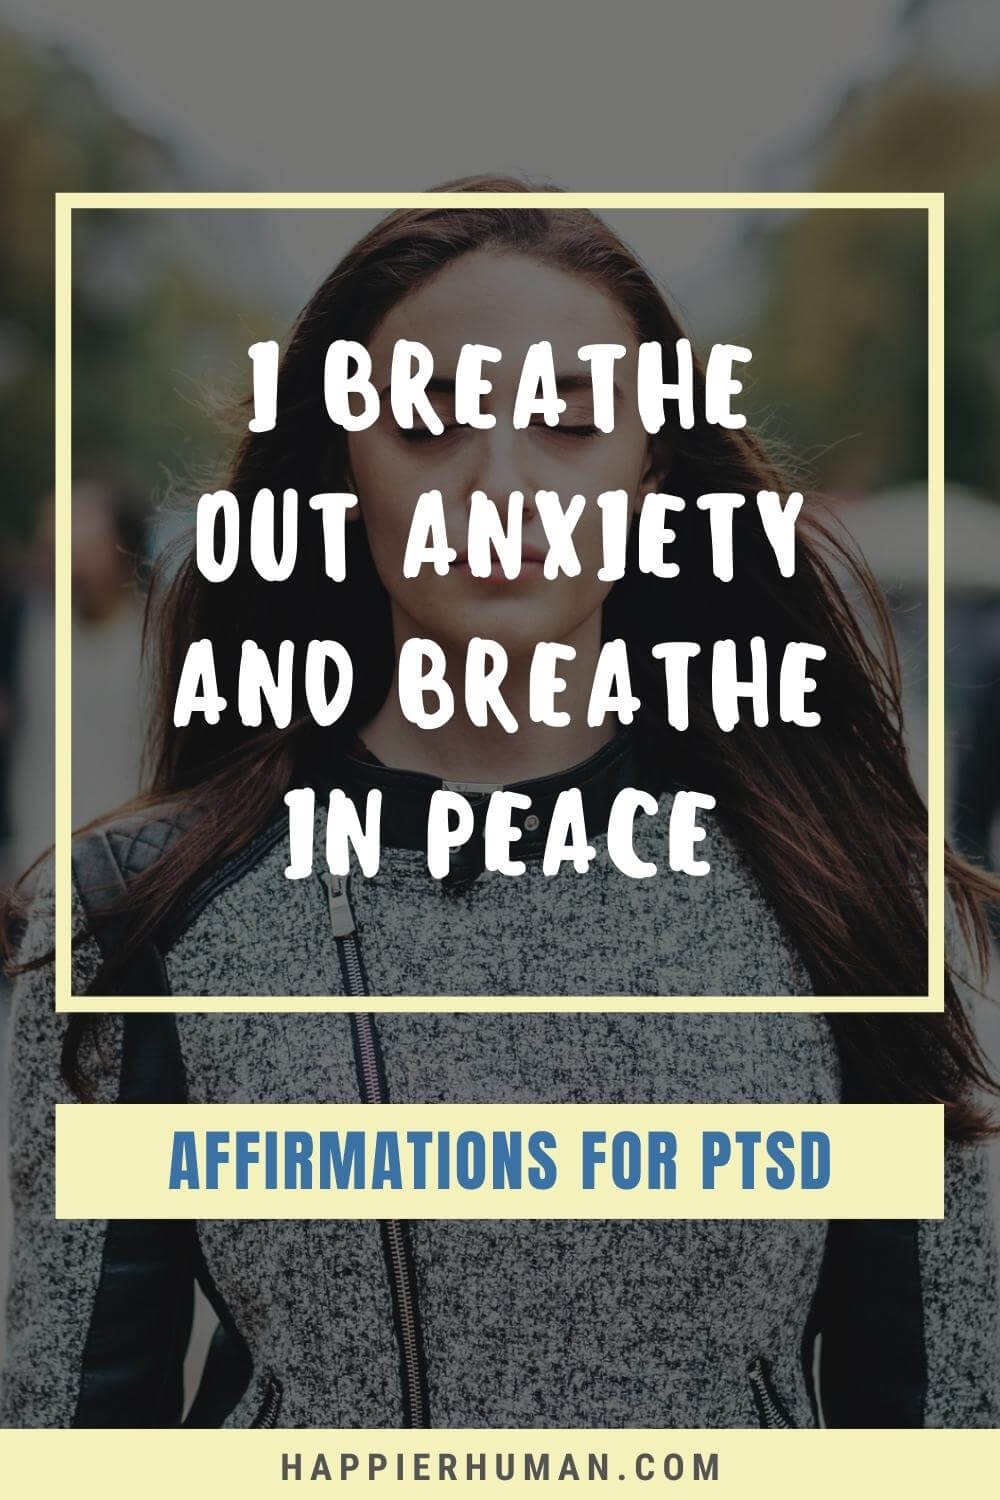 Affirmations For PTSD - I breathe out anxiety and breathe in peace | affirmations for healing the past | affirmations for religious trauma | trauma survivor mantra